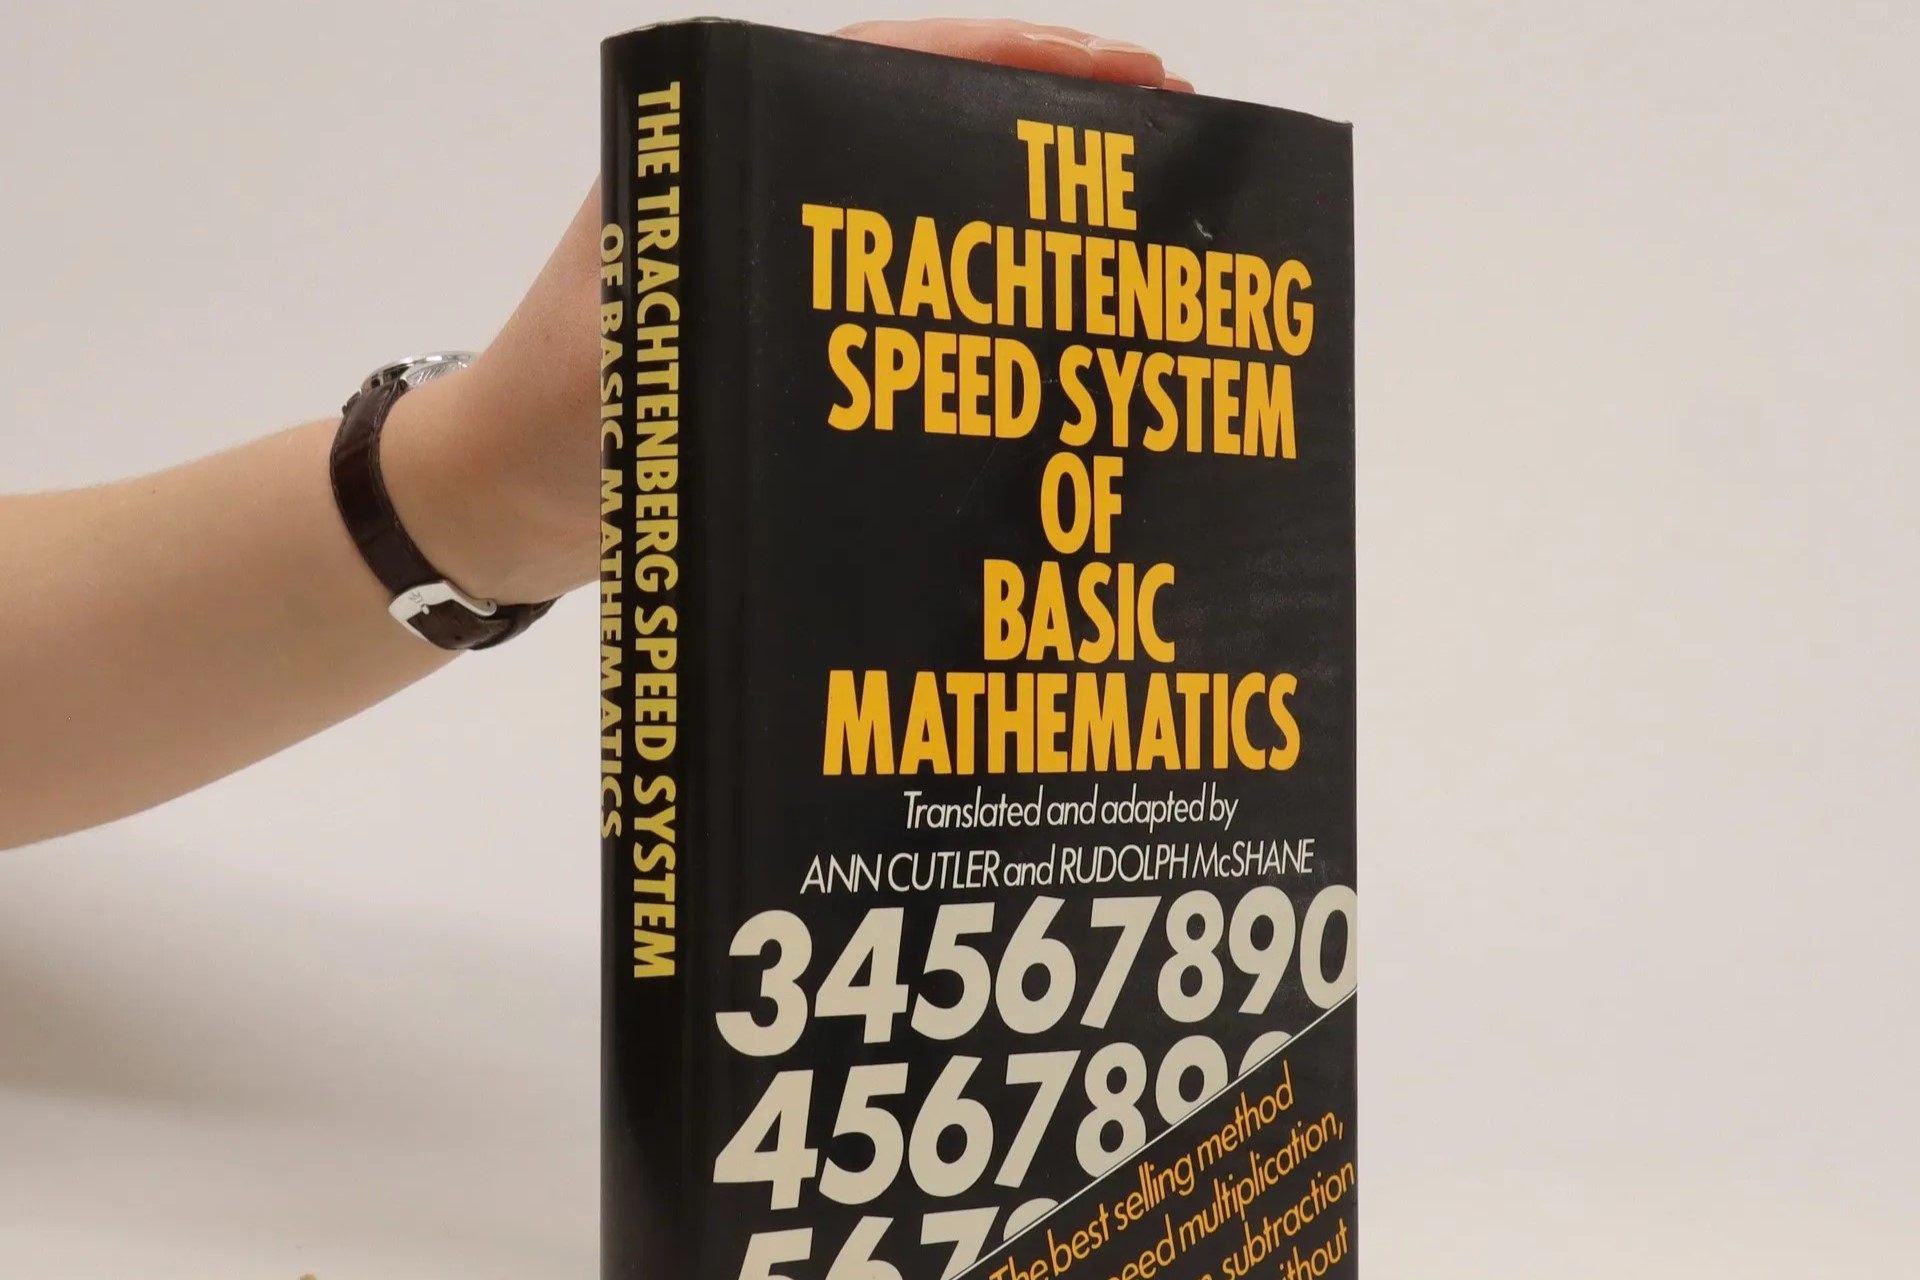 Unleash Your Math Genius With The Trachtenberg System – Boost Your Mental Math Skills Now!